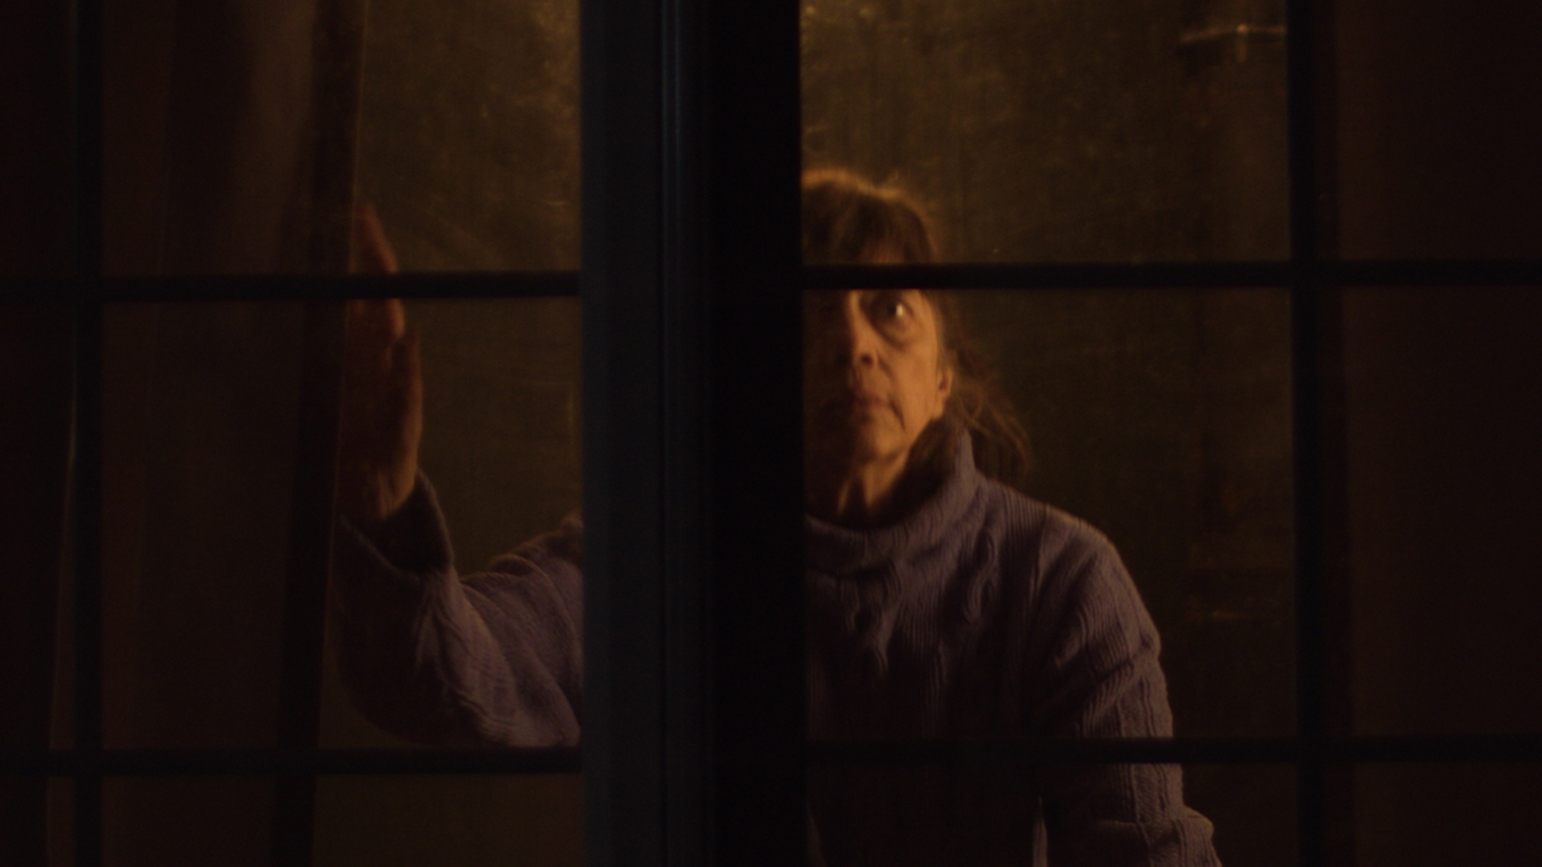 Still from "Blue Diane" of a woman looking out a dark window